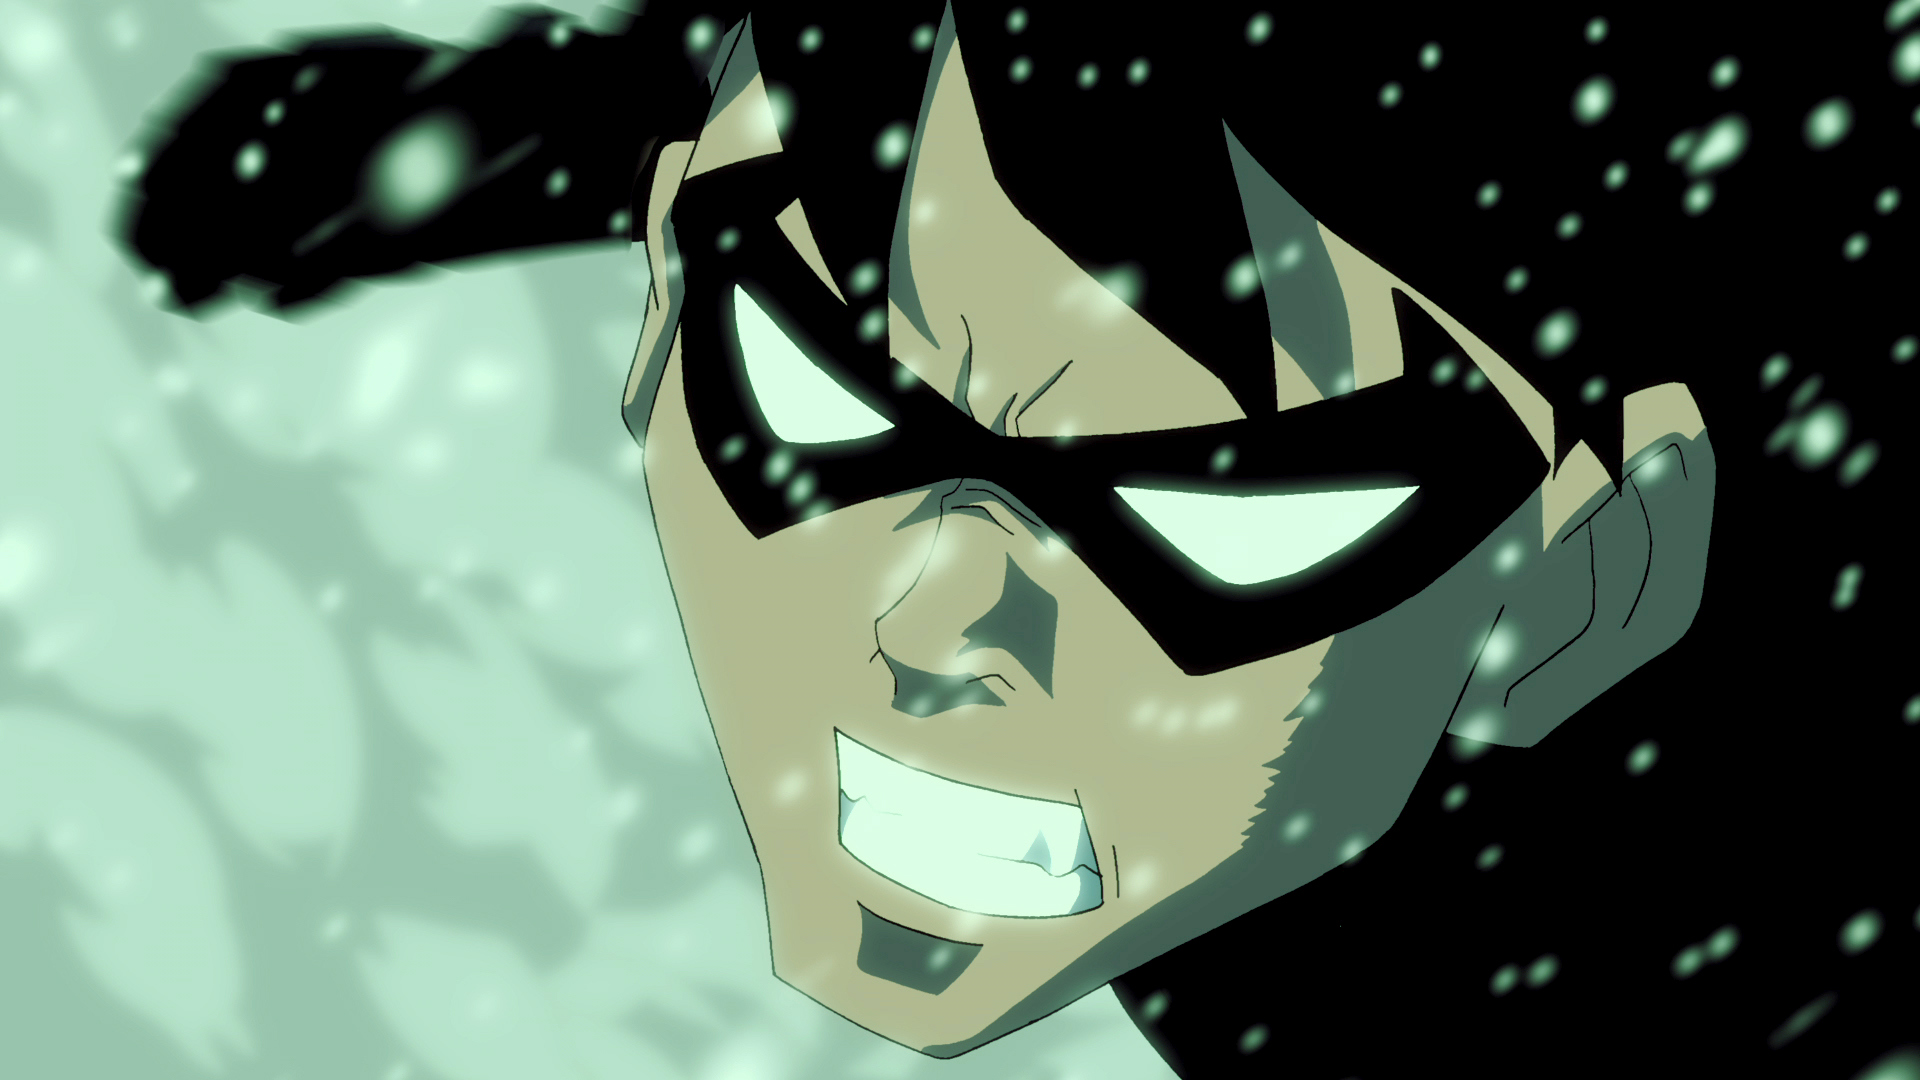 Images & Spoilers For This Week's Young Justice - "Usual Suspects"